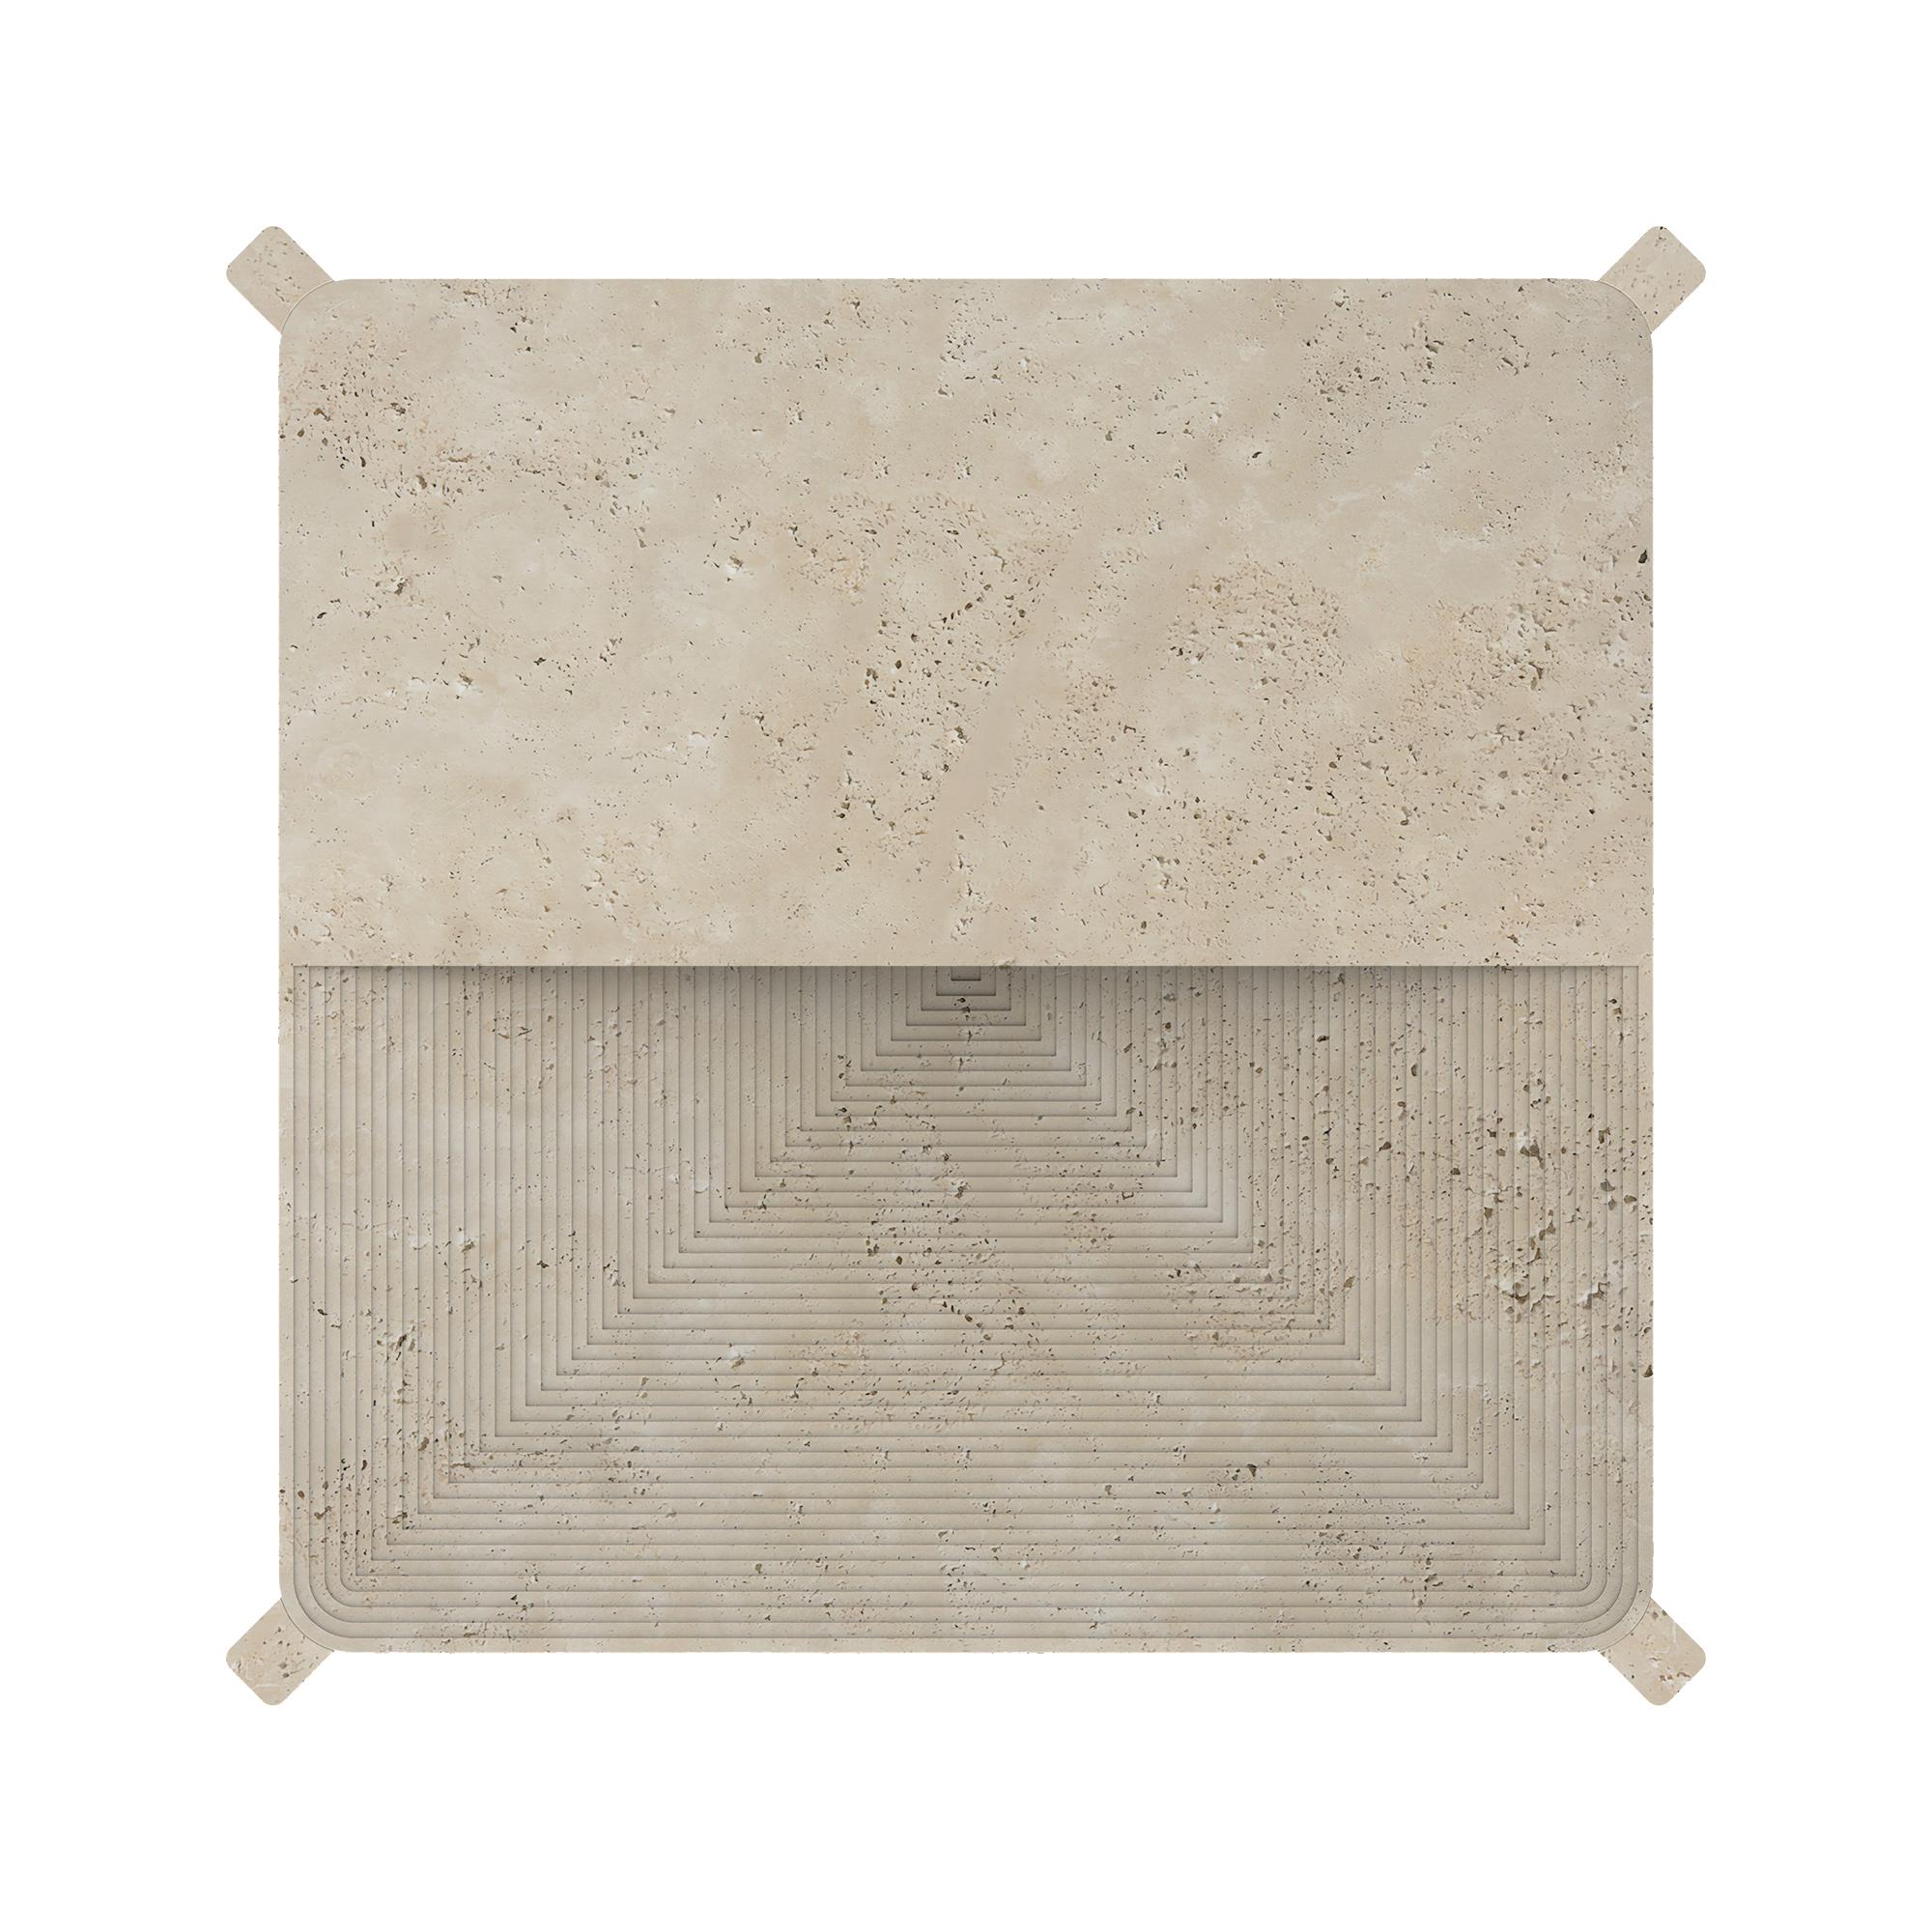 Arkhe No 1 Coffee Table Square Travertine, Modern Sculptural by Fulden Topaloglu In New Condition For Sale In Istanbul, TR